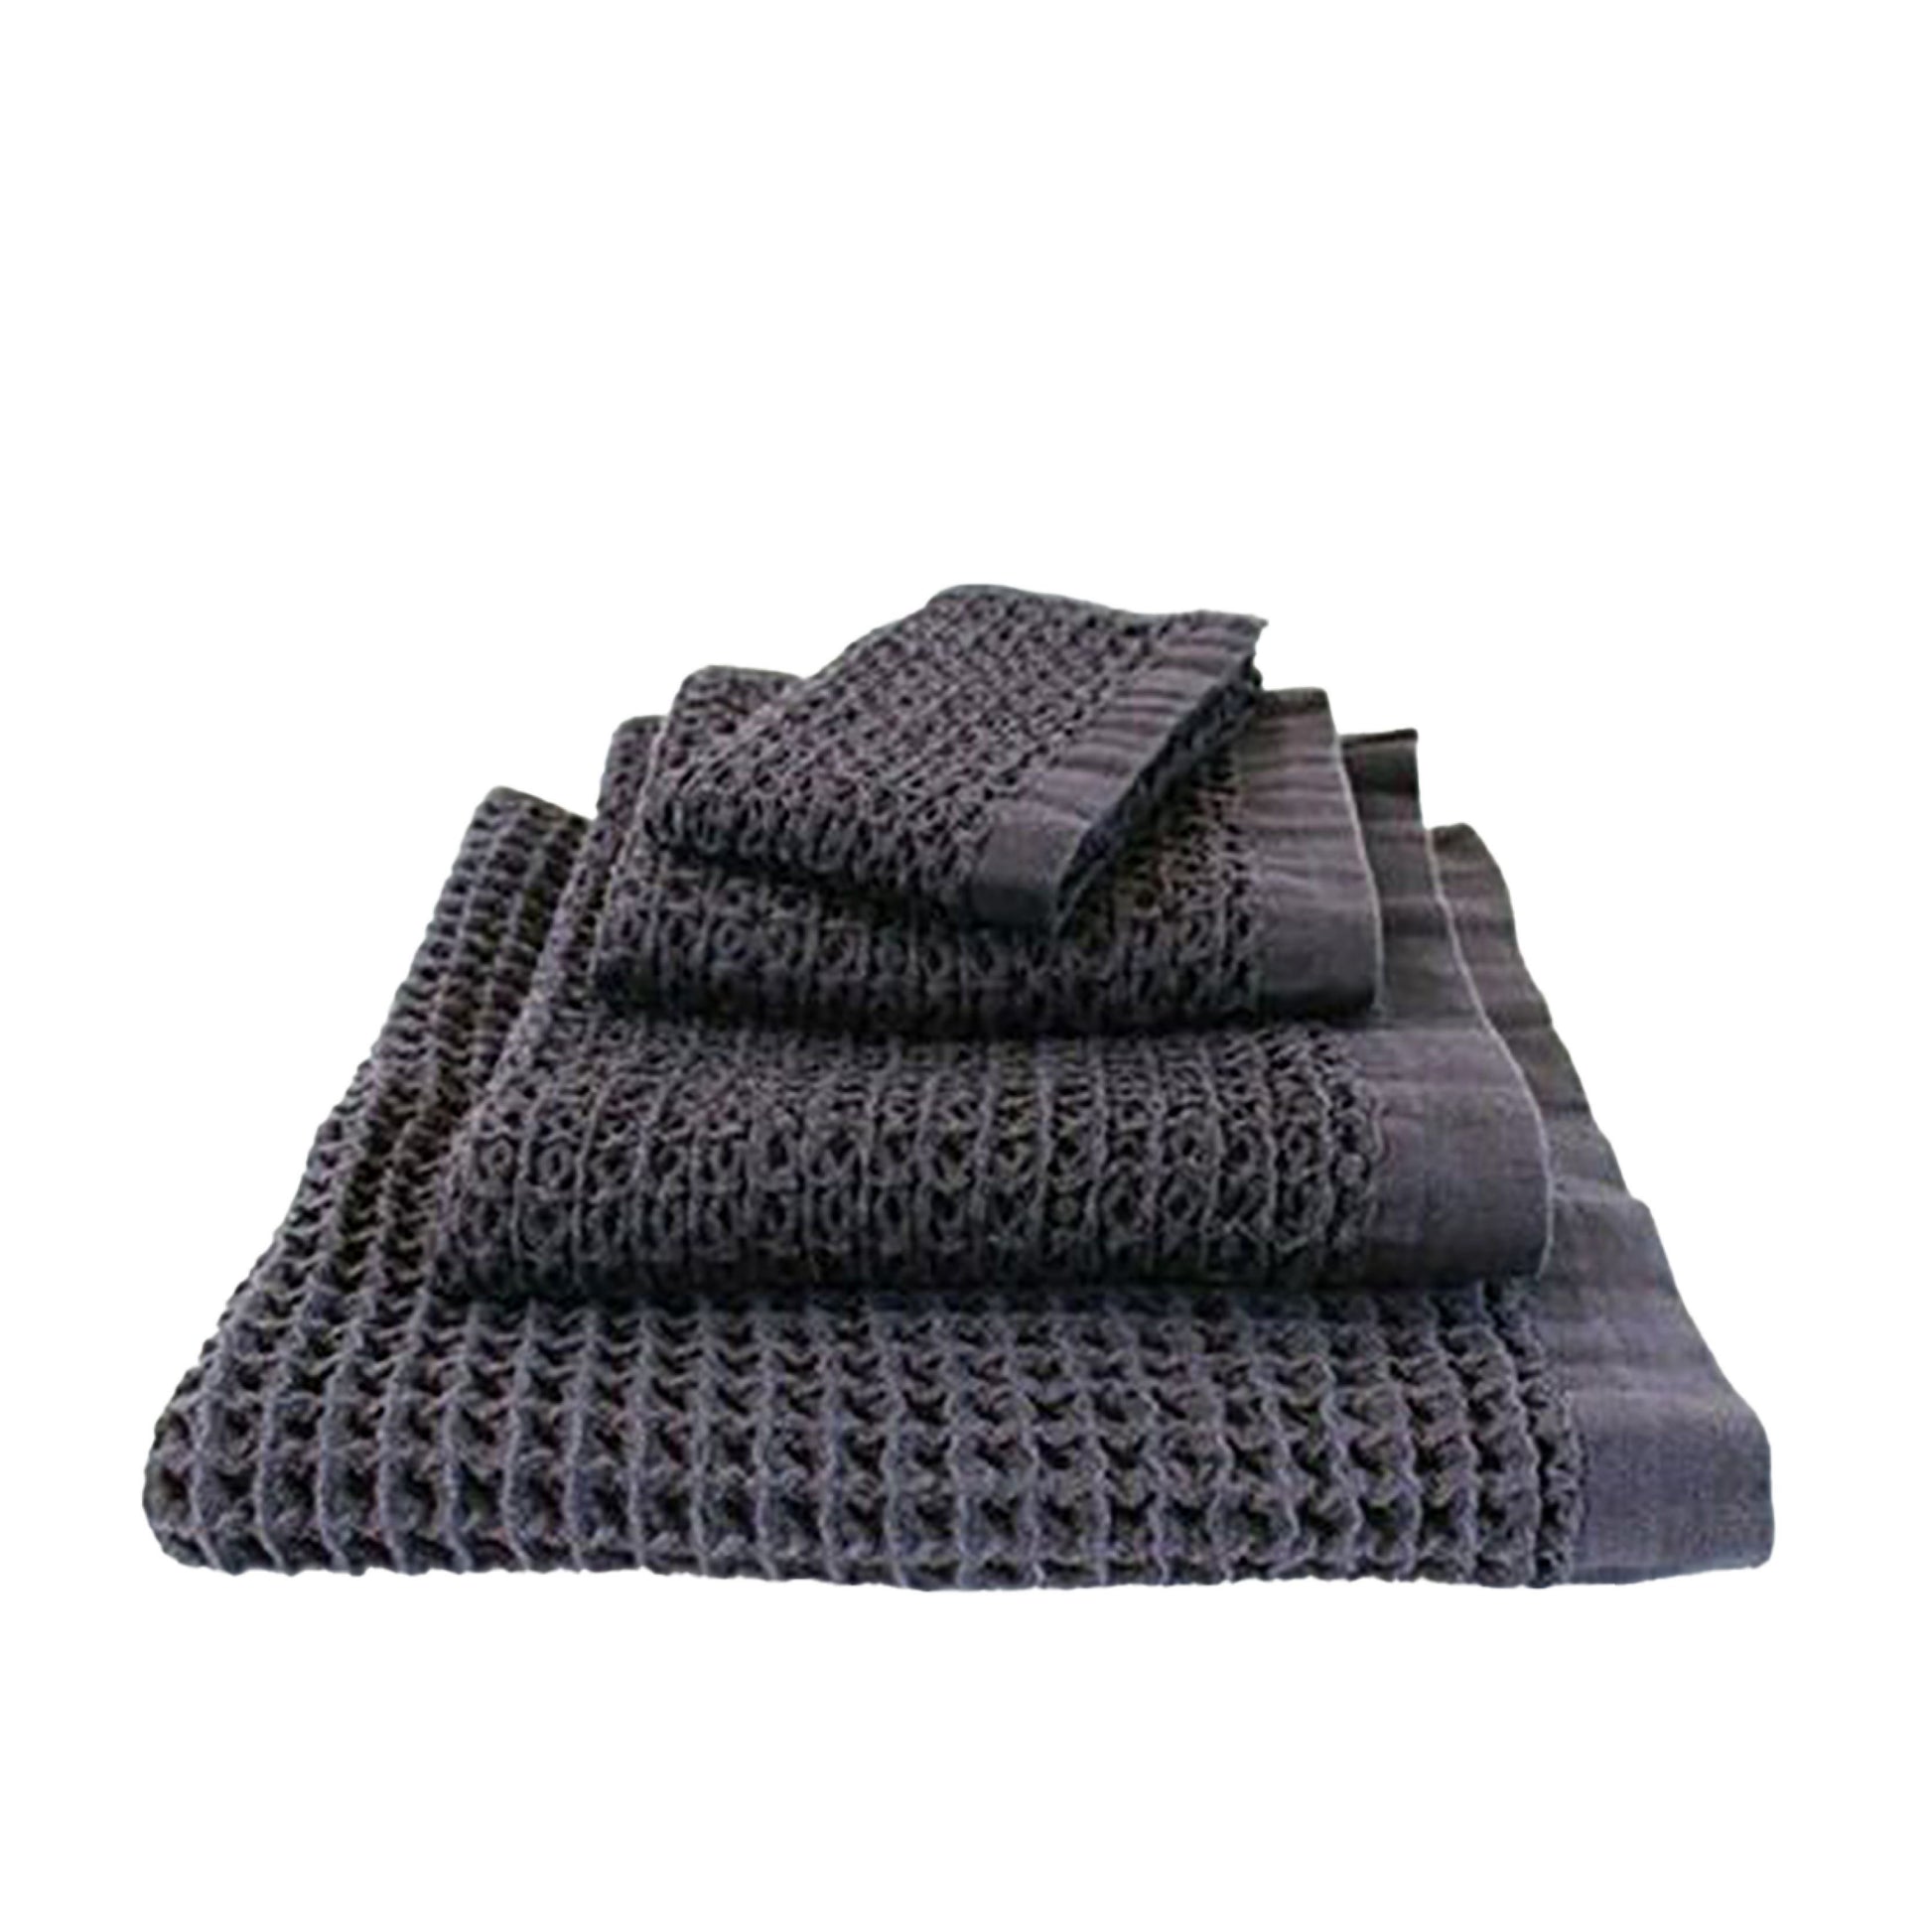 The Brera towel range has a luxurious large waffle weave that adds a textural dimension to your bathroom space.  Beautifully soft, Kontex Japanese towels are woven at gentle speeds on an old fashioned weaving machine. Kontex towels are highly absorbent, lightweight, fast-drying and environmentally friendly.  Made from 100% cotton.  Colour: navy  Dimensions Hand towel: 38cm wide x 85cm long  Face cloth: 36cm square 